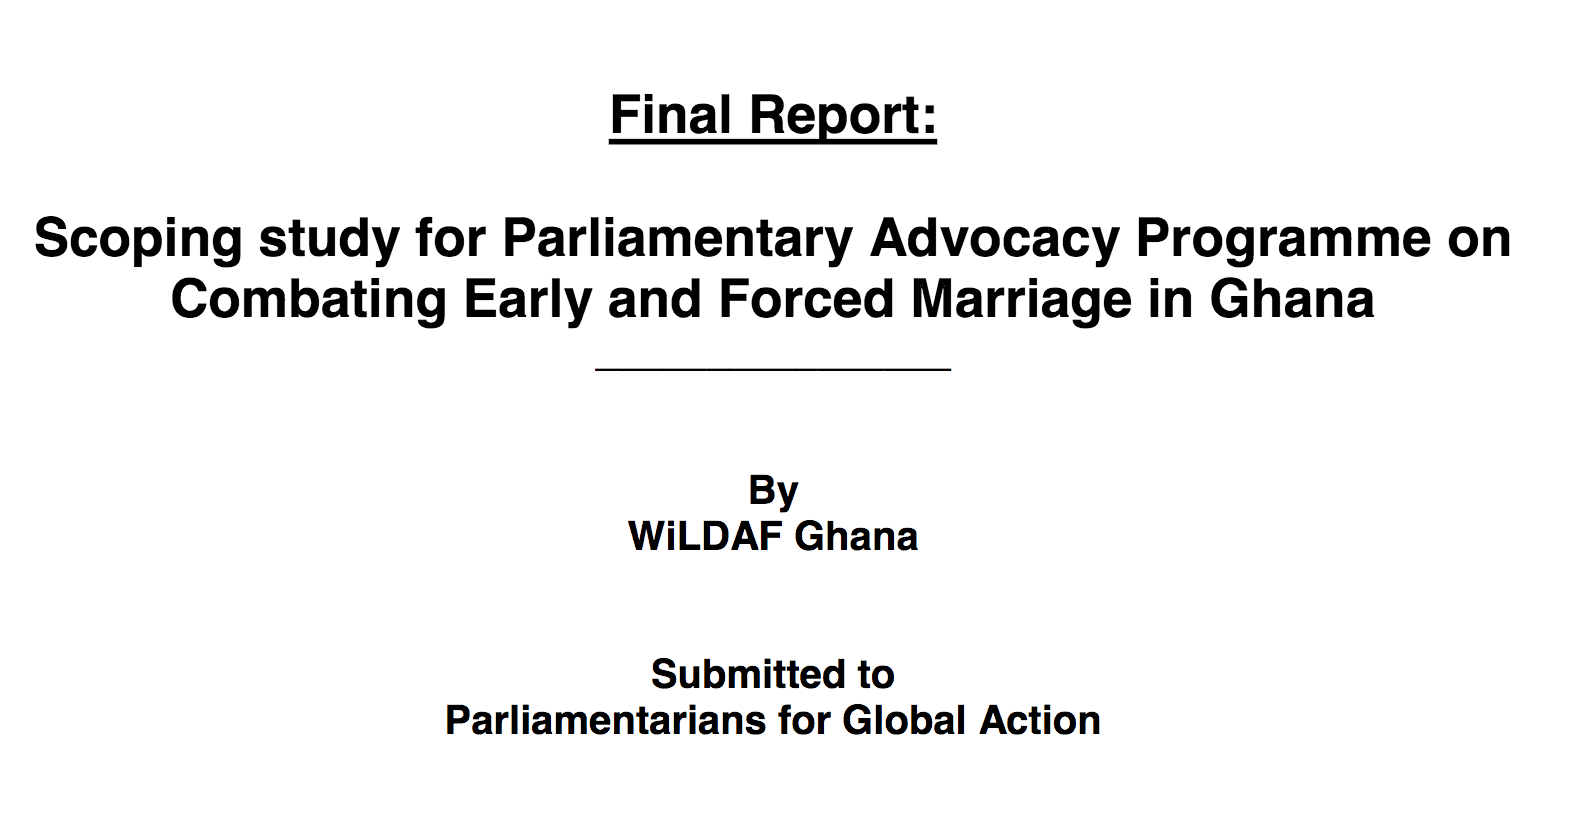 Scoping study for Parliamentary Advocacy Programme on Combating Early and Forced Marriage in Ghana